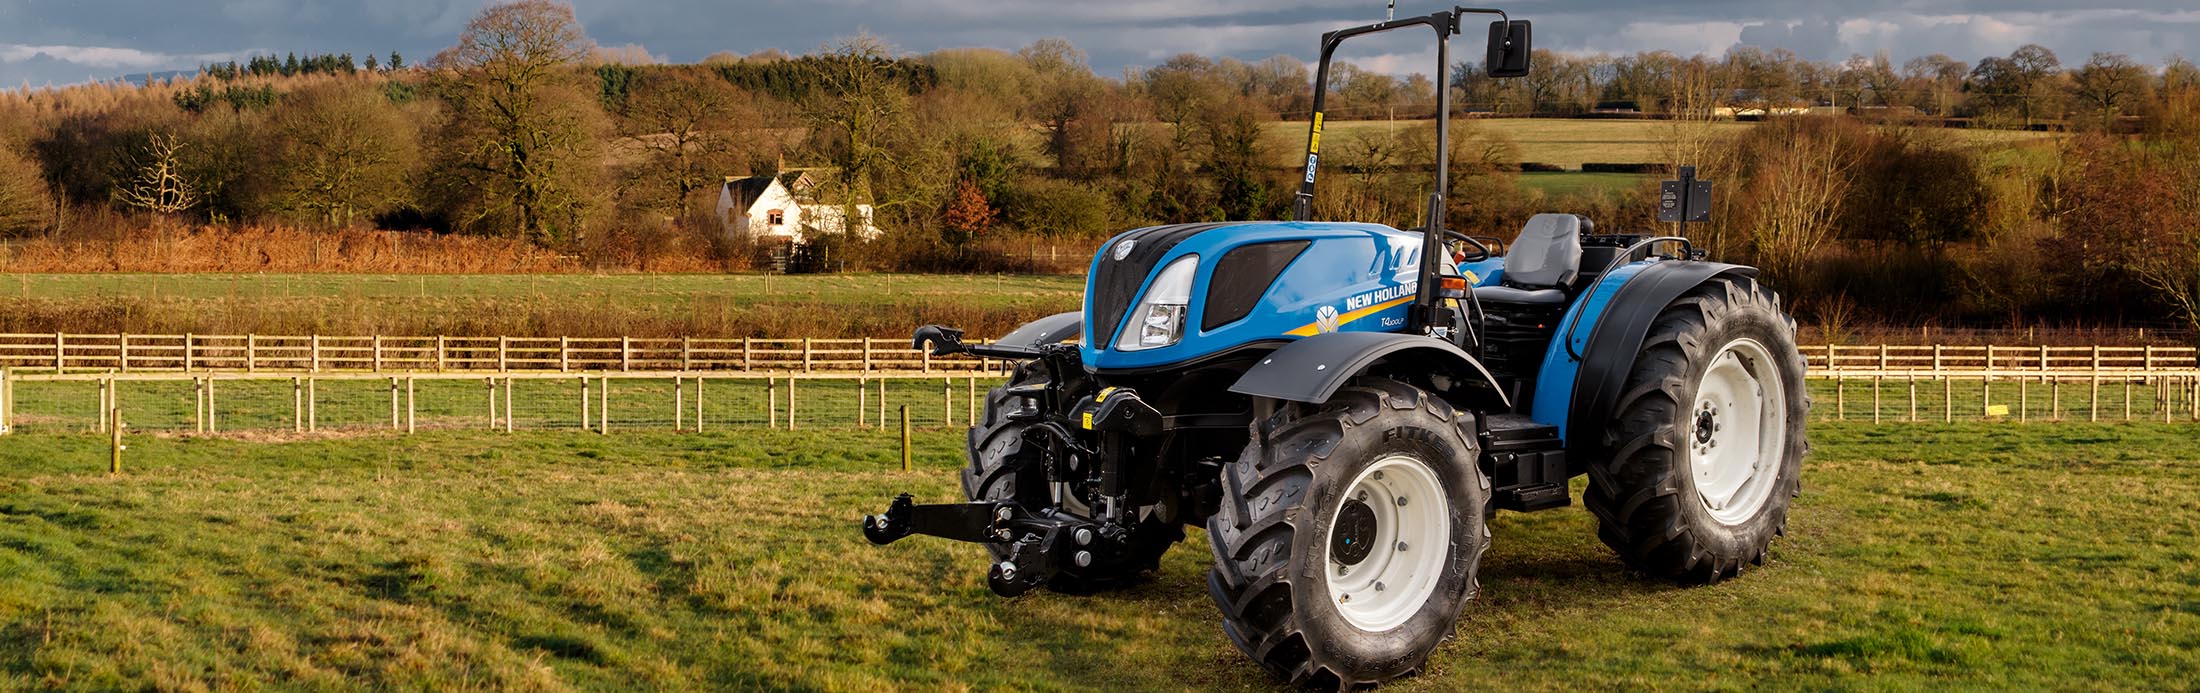 New Holland Brand Tractor in Field